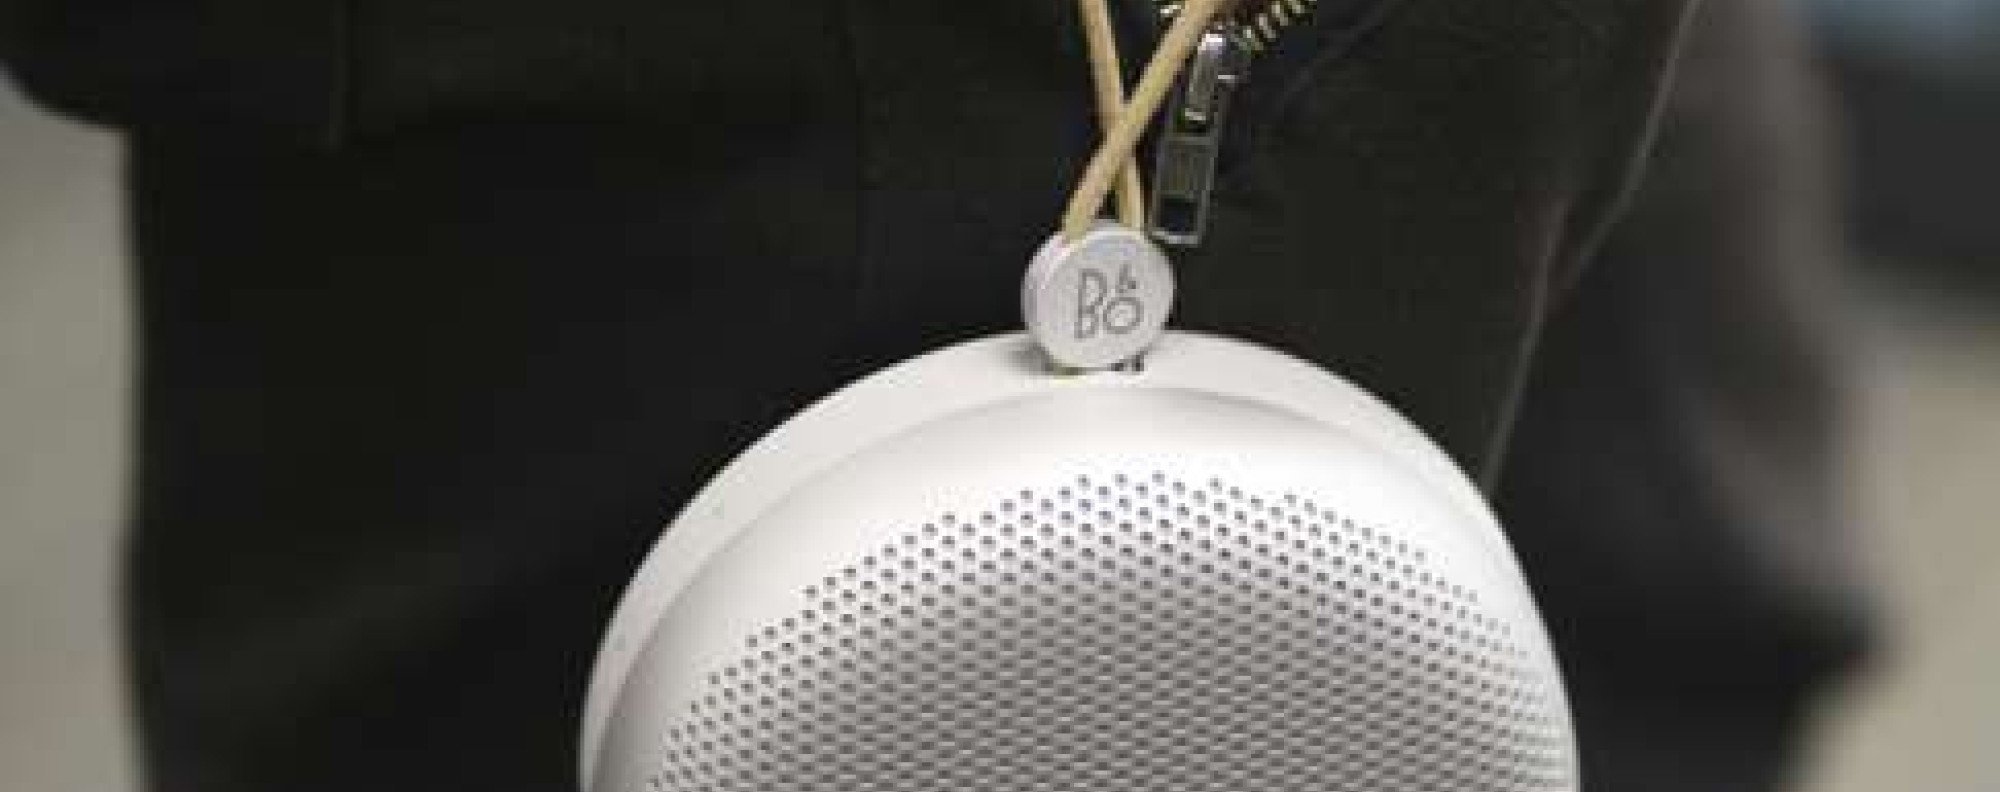 Tech review: B&O BeoPlay A1 – small, portable Bluetooth speaker